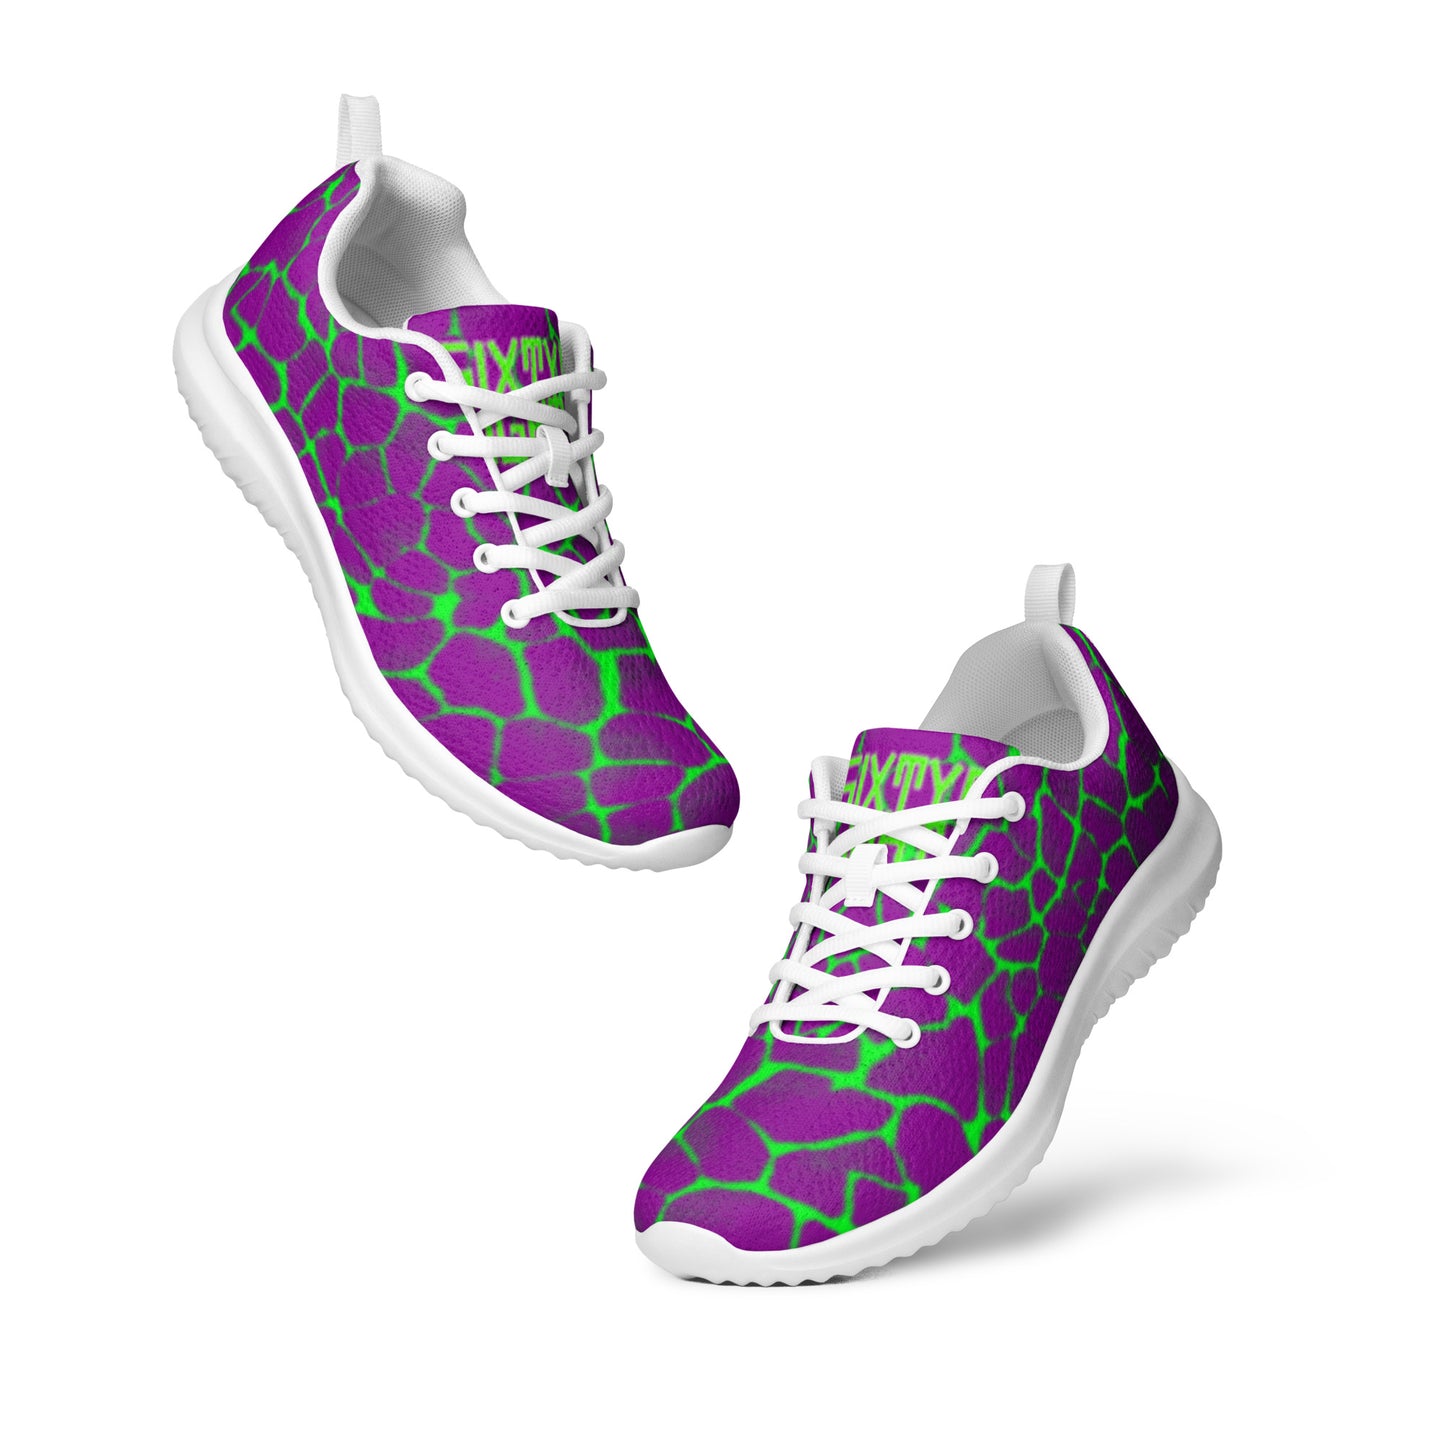 Sixty Eight 93 Lime Green & White Boa Purple Lime Women’s Athletic Shoes